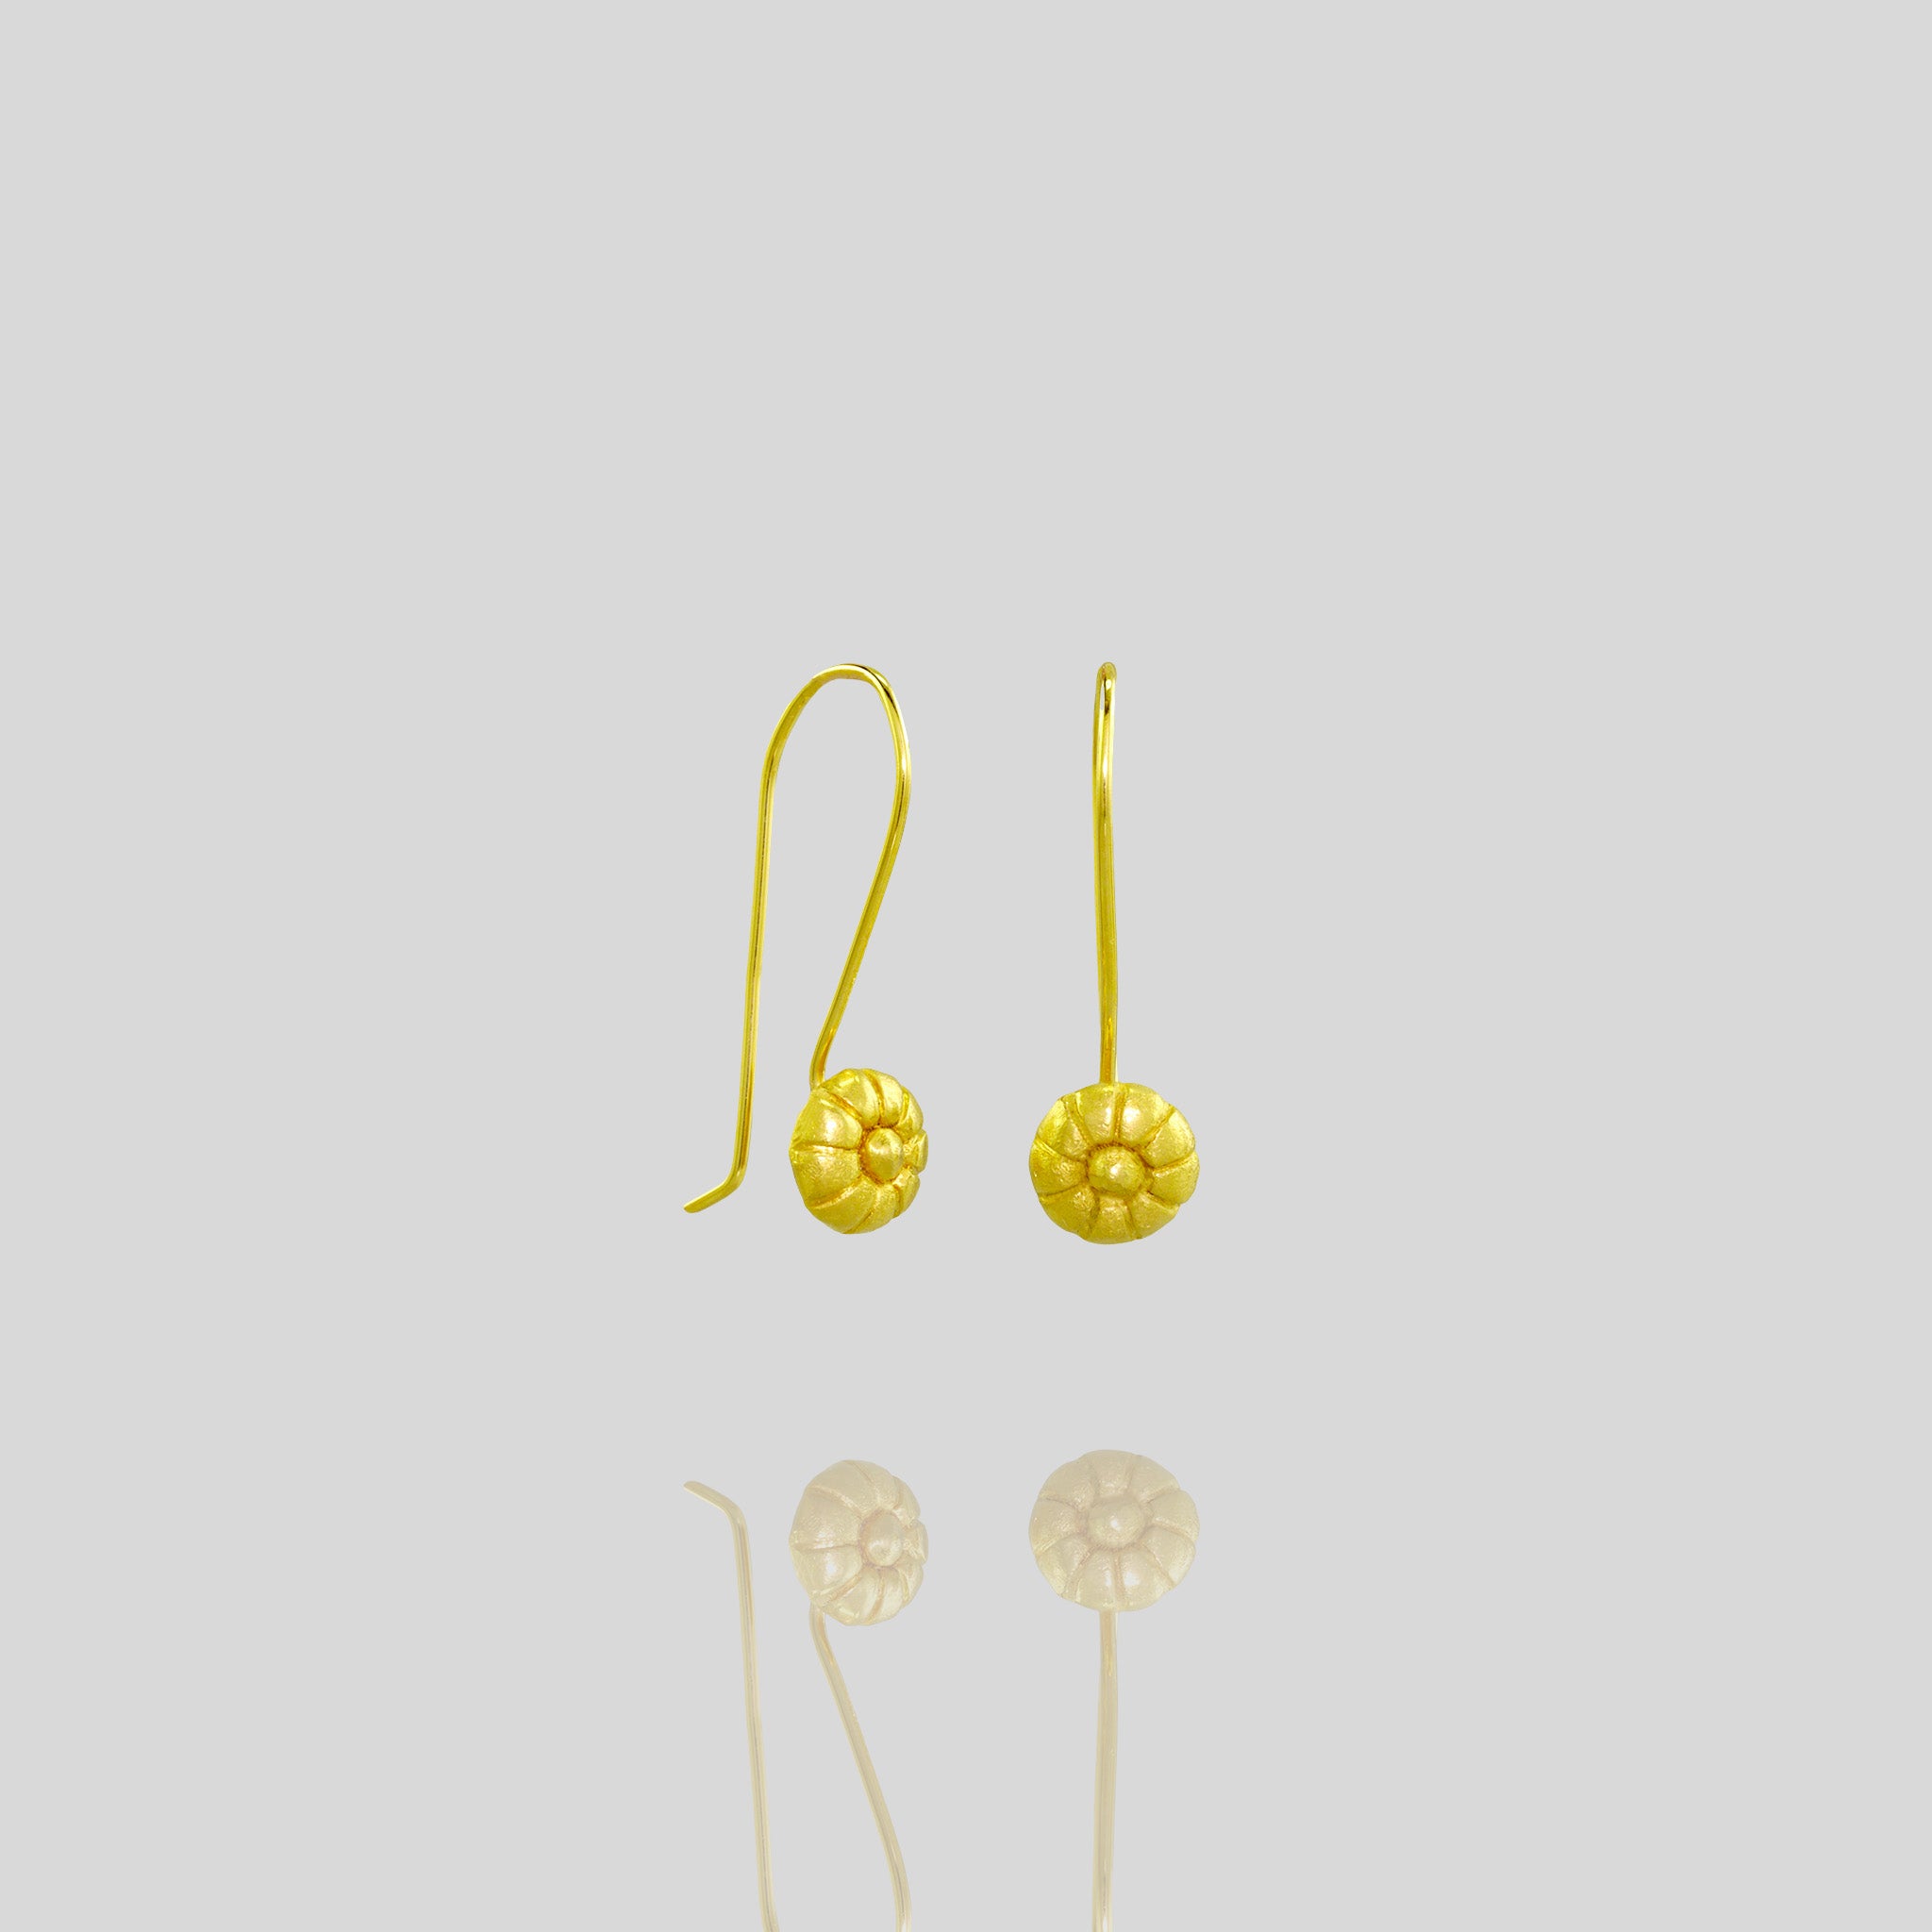 Mallow Fruit-inspired Gold Drop Earrings with Delicate Beauty